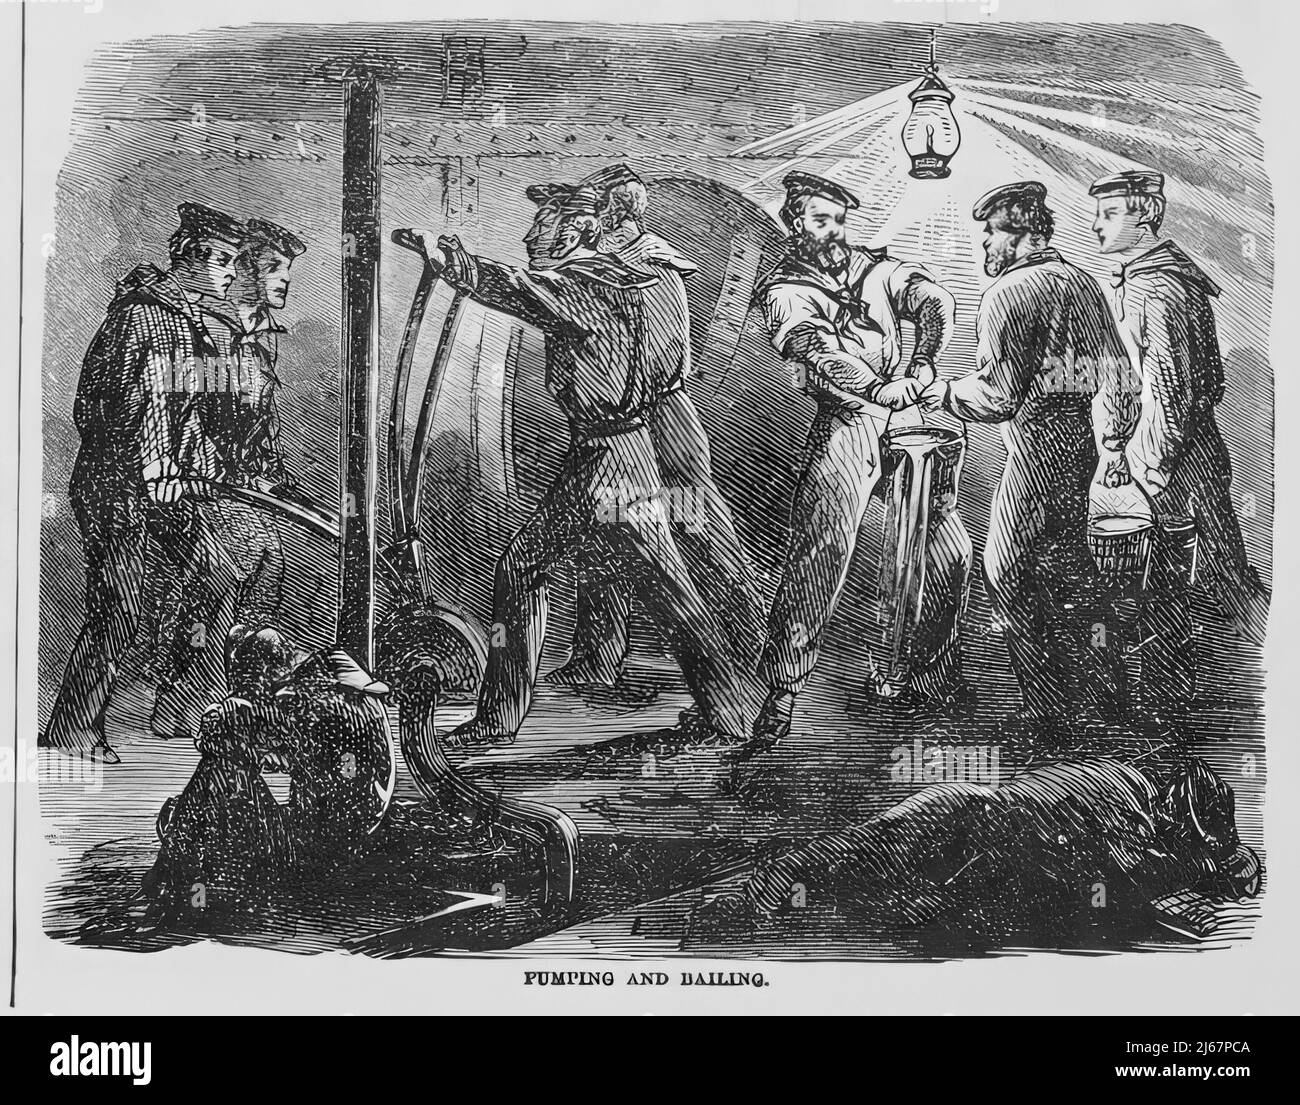 Pumping and Bailing the USS Monitor, December 1862, in the American Civil War. 19th century illustration Stock Photo